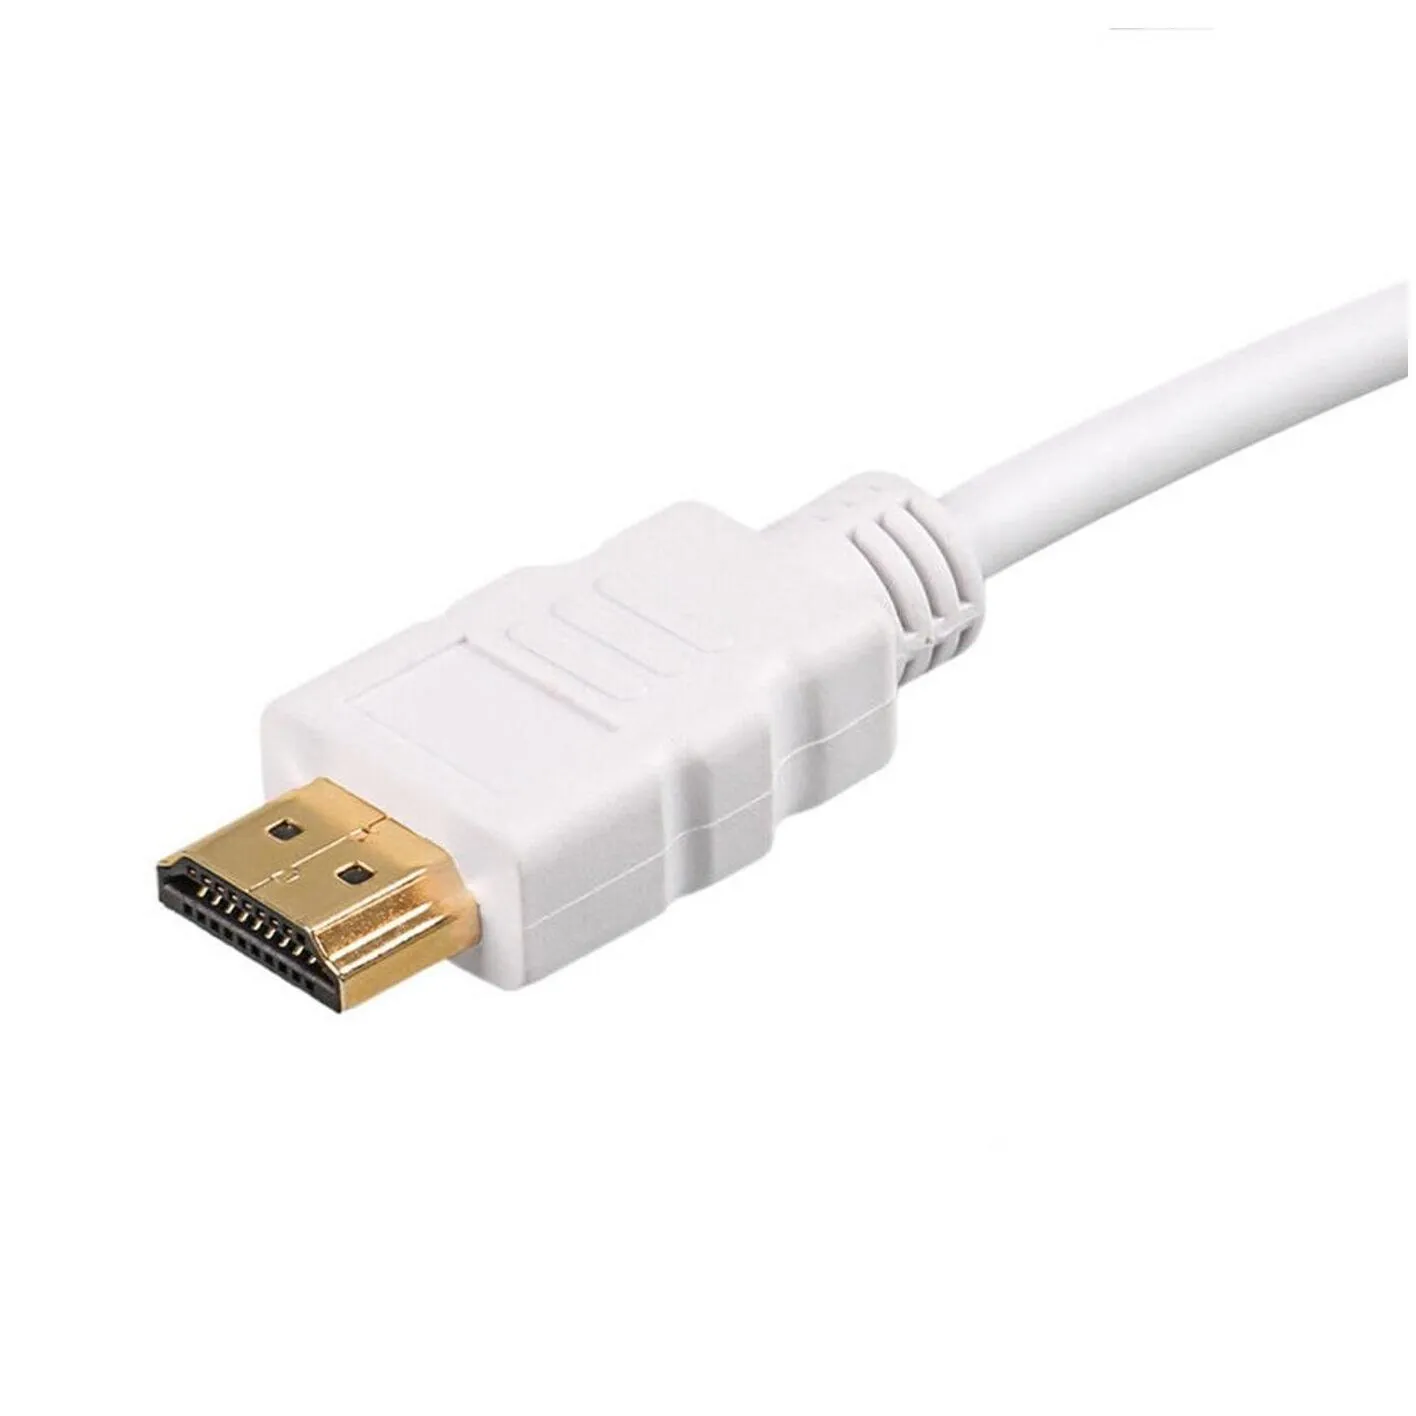 Computer Cables Connectors New 1080P Male To Vga Female Video Cord Converter Adapter With O Port Support Micro Usb Power Supply For Pc